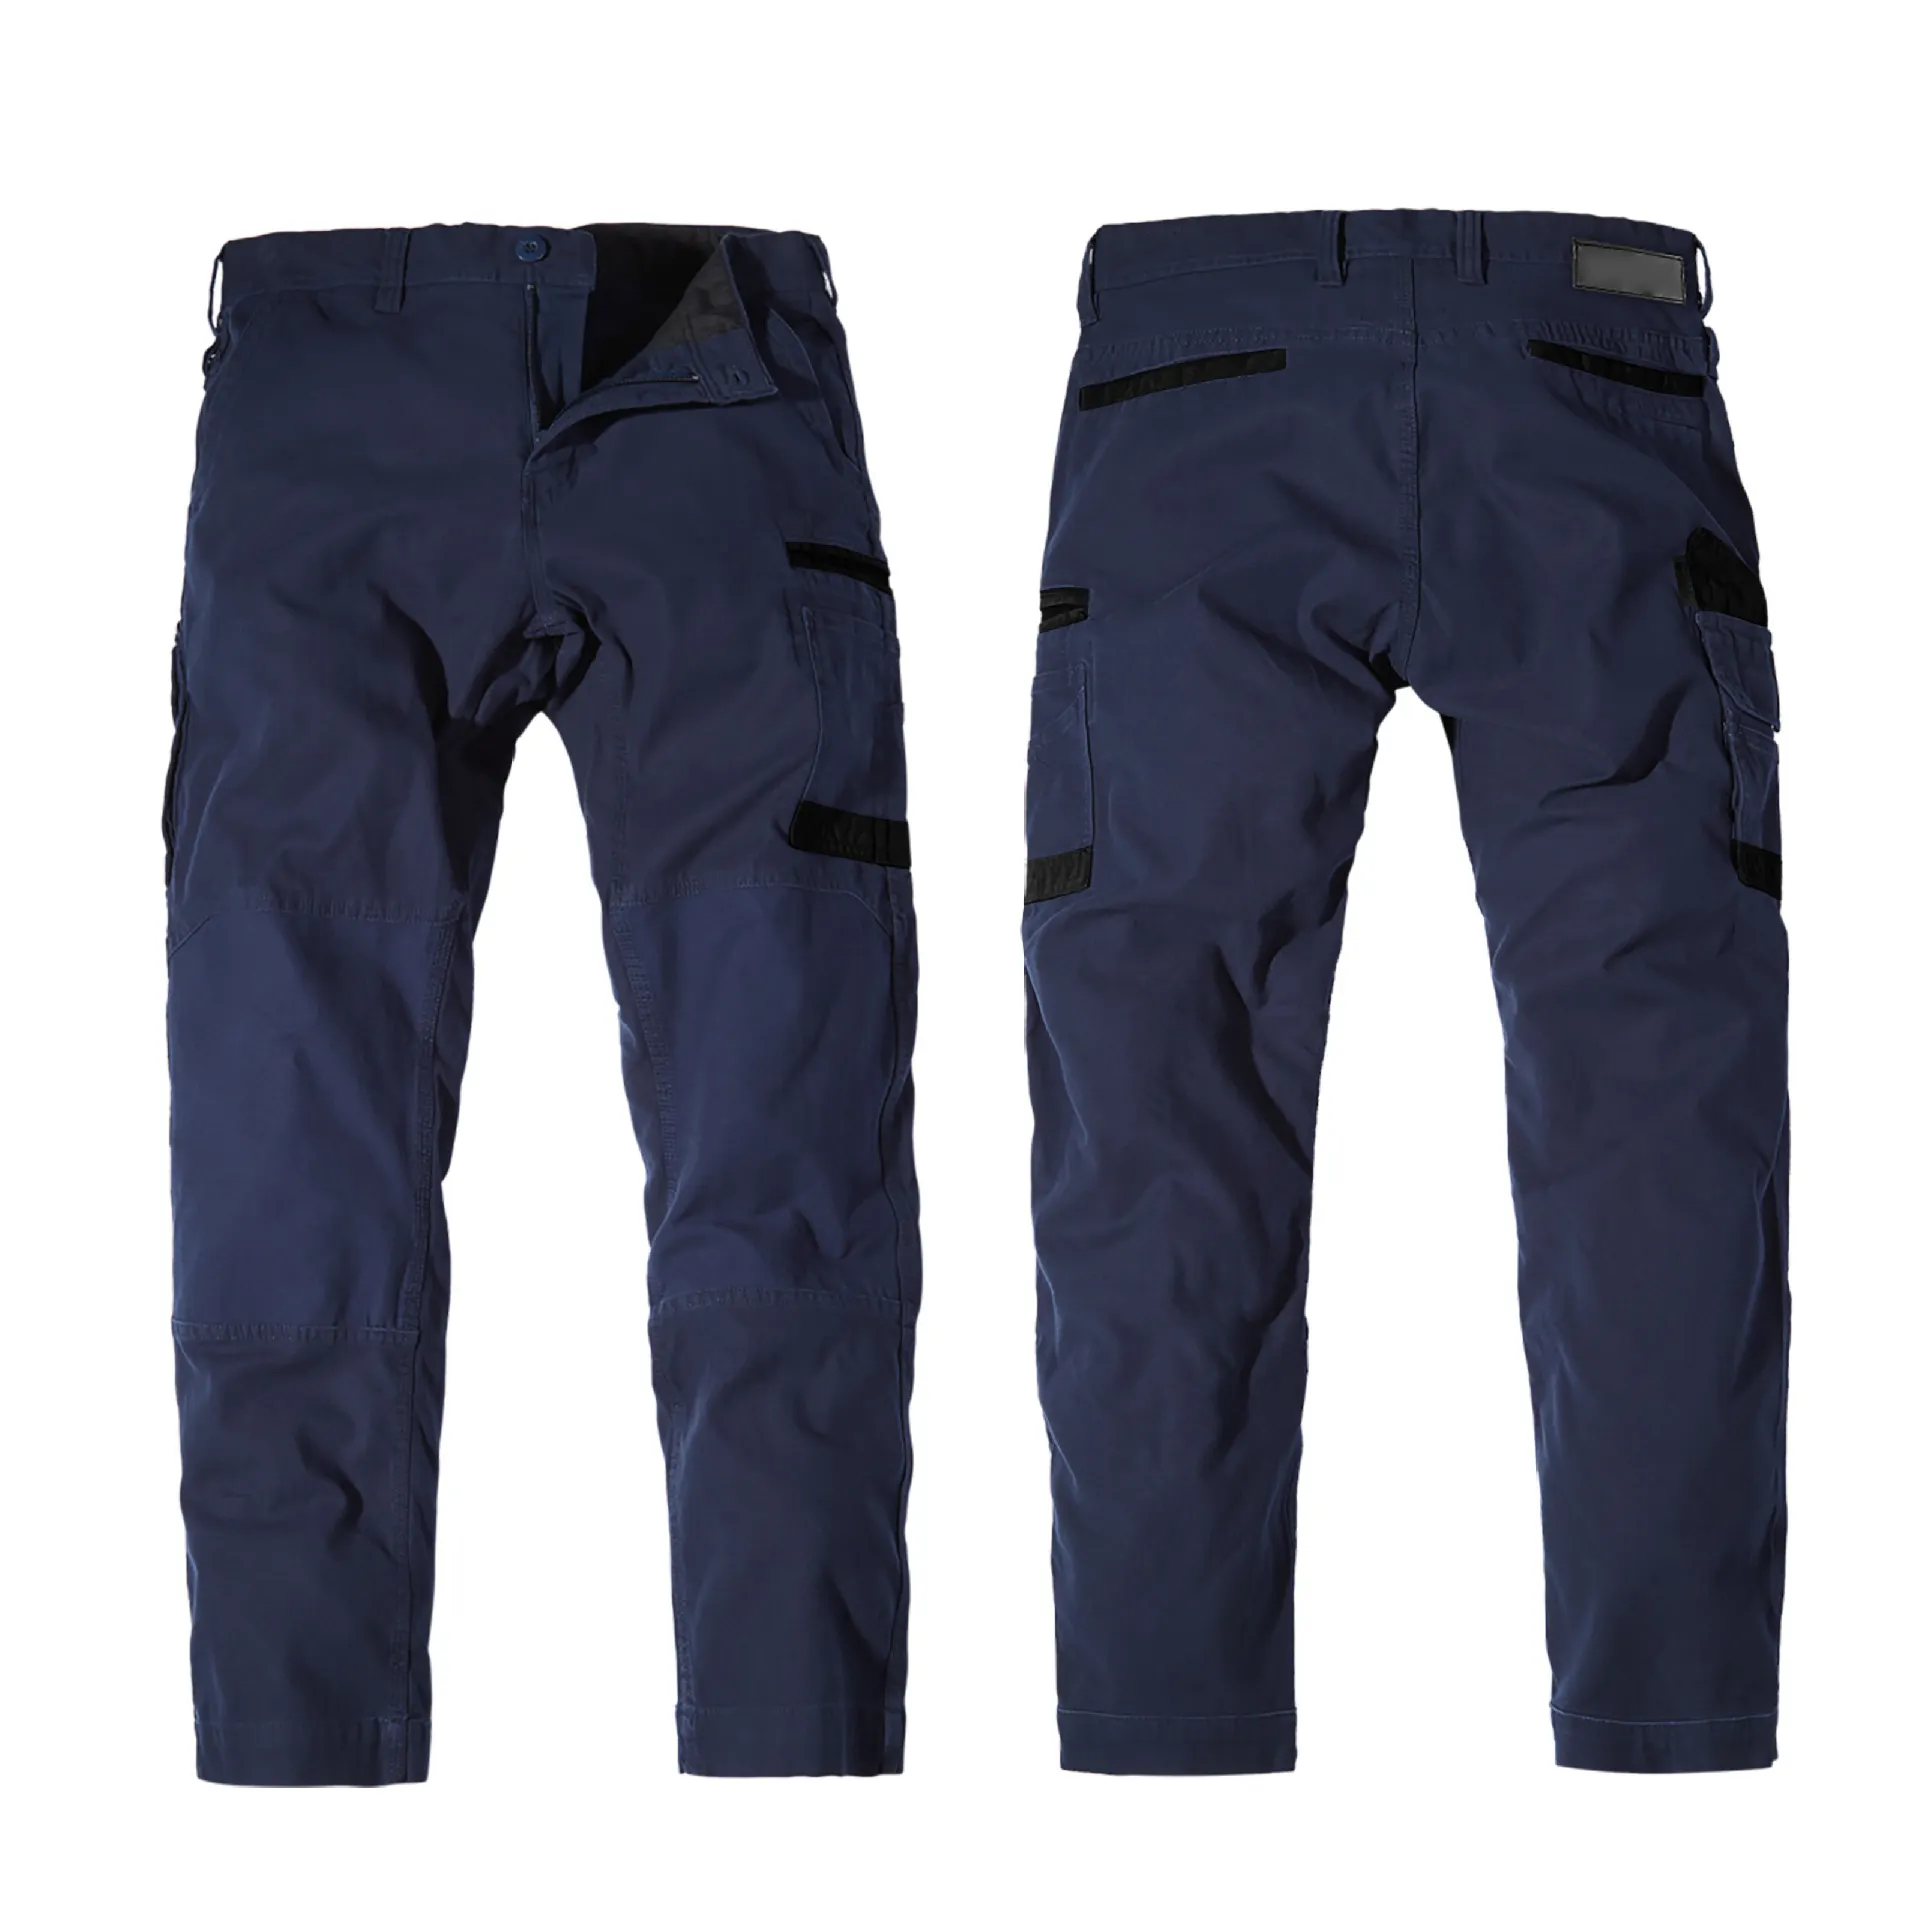 Men Safety Cargo Pants Multi Pocket Labor Protection Work Trousers Work Wear